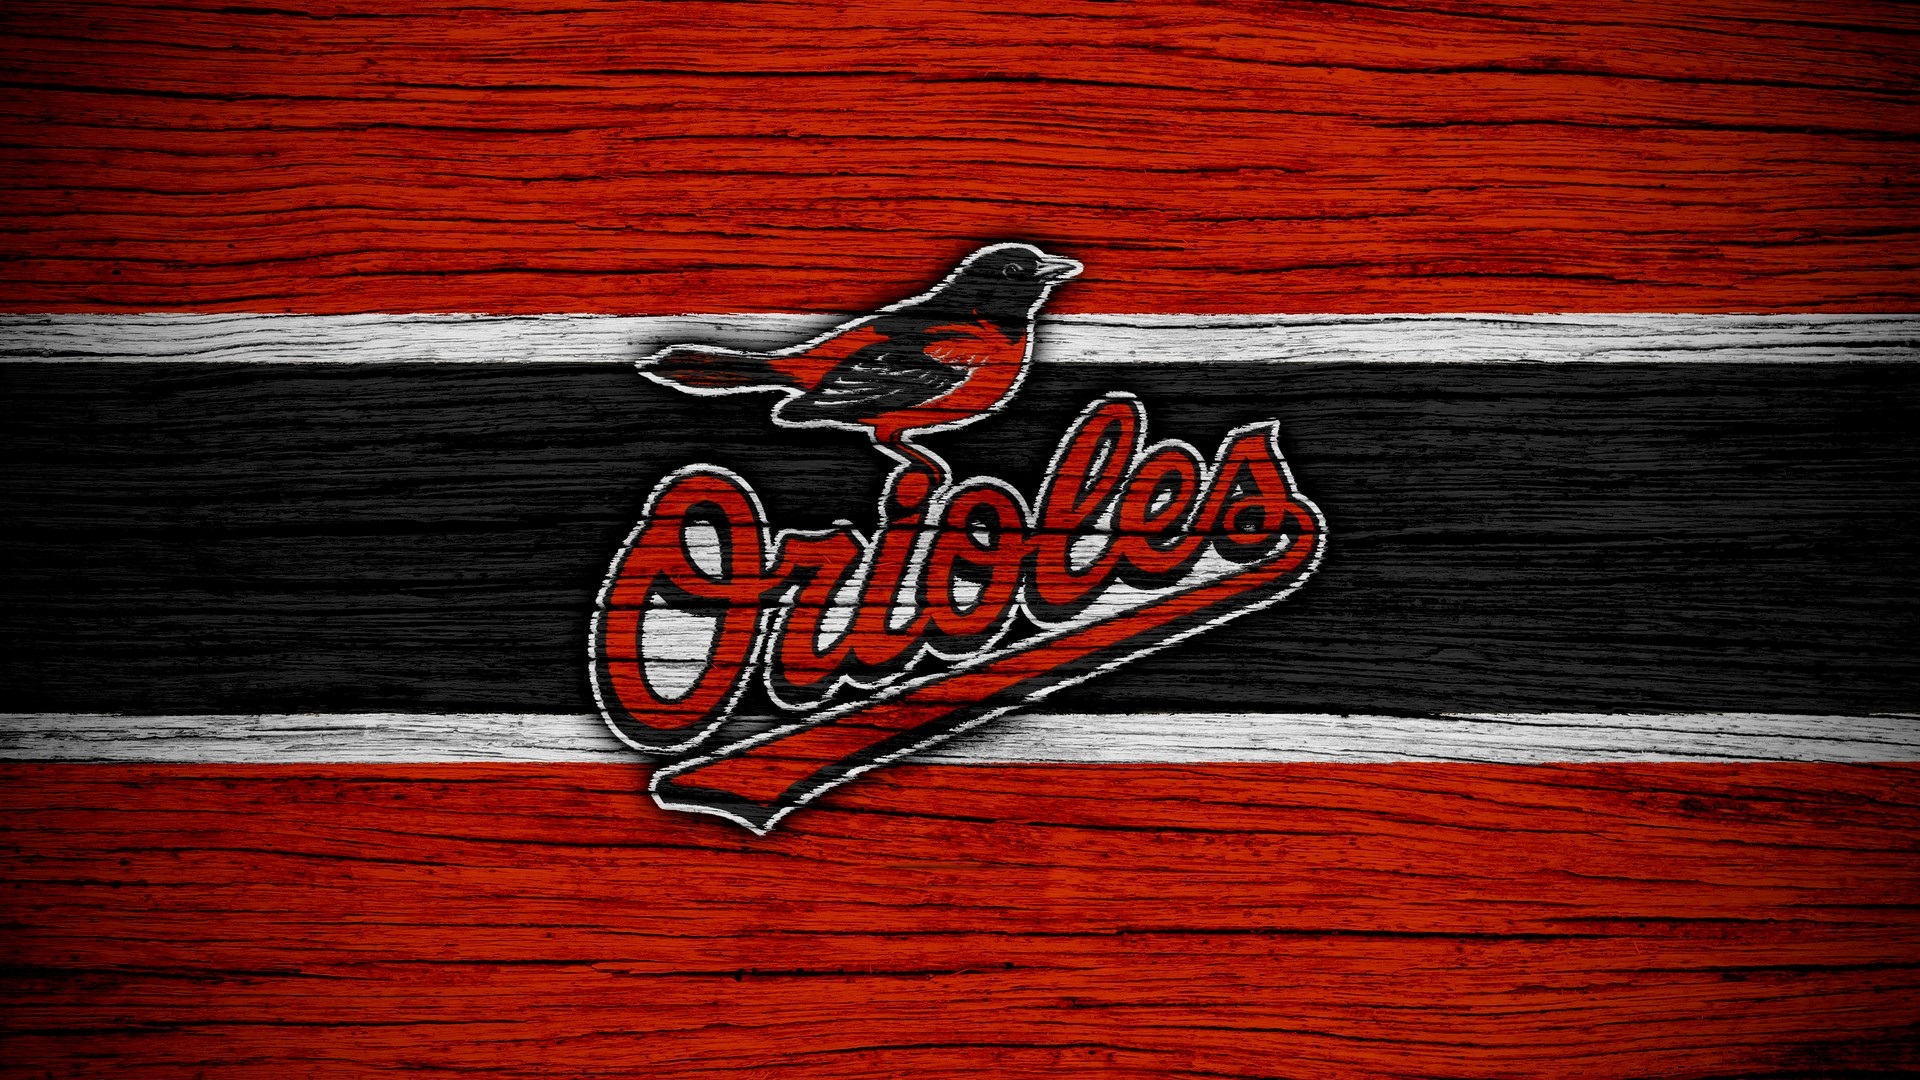 Baltimore Orioles For Desktop Wallpaper with high-resolution 1920x1080 pixel. You can use this wallpaper for Mac Desktop Wallpaper, Laptop Screensavers, Android Wallpapers, Tablet or iPhone Home Screen and another mobile phone device